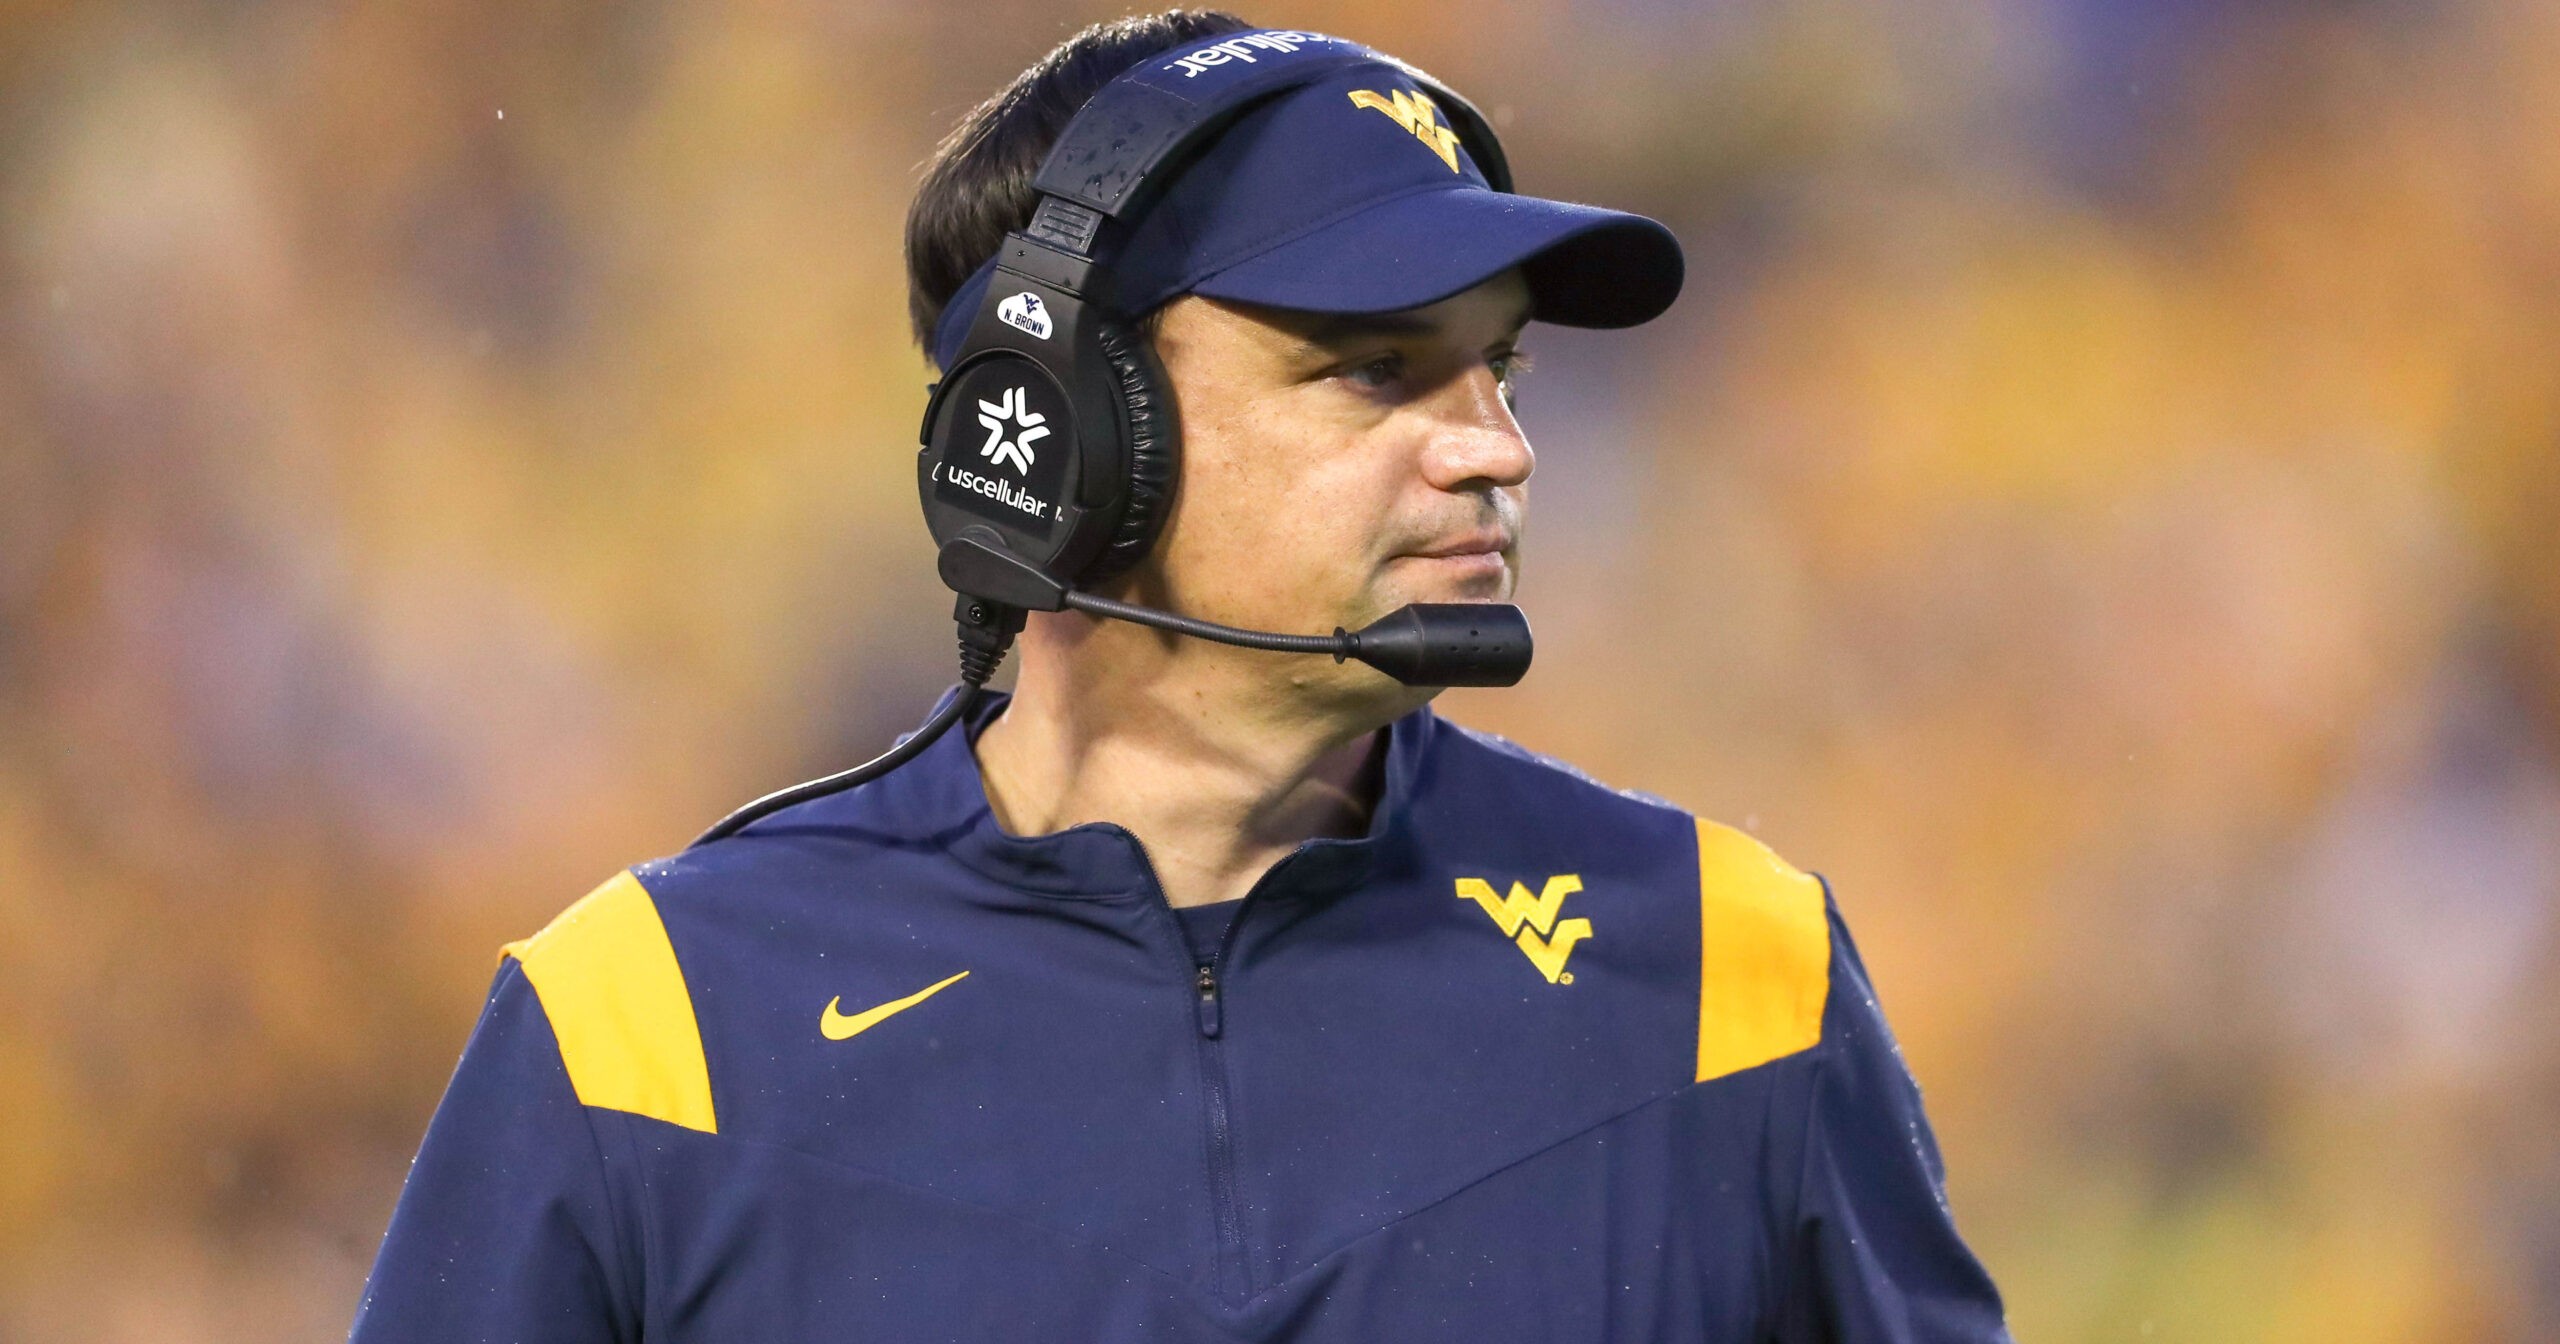 neal-brown-on-what-made-the-difference-for-west-virginia-following-win-vs-pitt-in-backyard-brawl